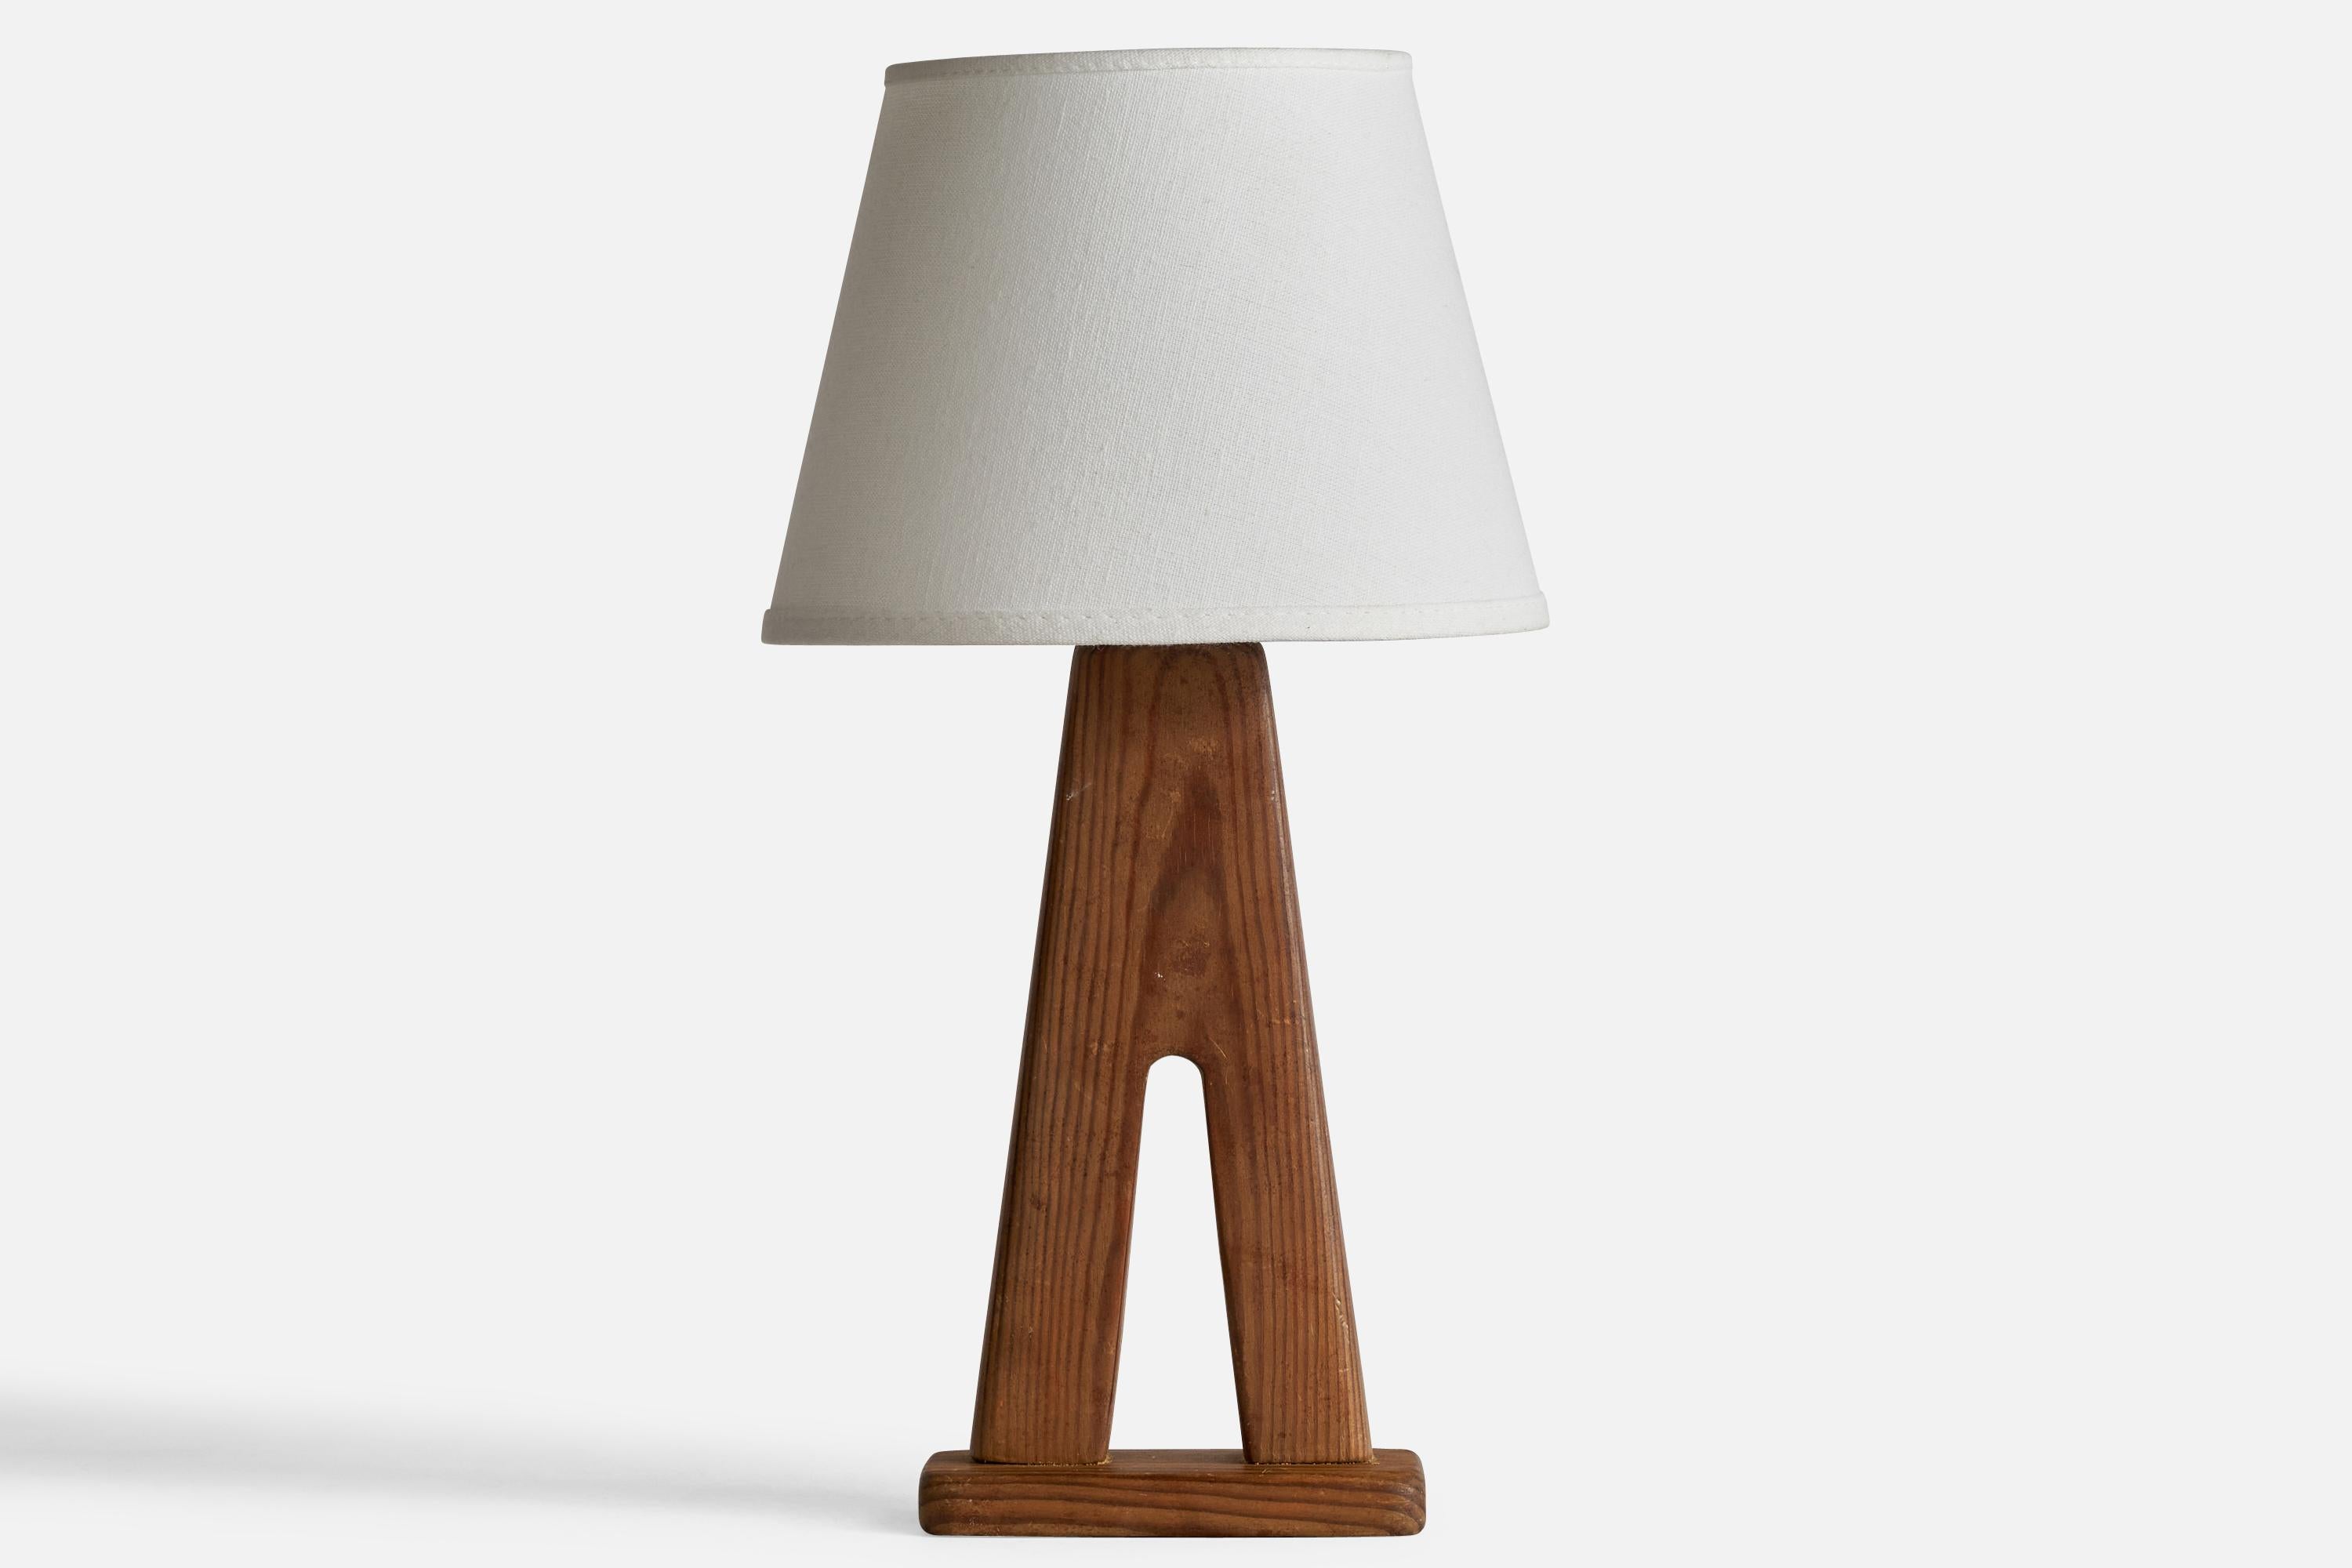 A pine table lamp designed and produced in Sweden, 1950s.

Please note cord feeds from socket exposing cord running along base.

Dimensions of Lamp: 11.55” H x 5” W x 3.1” D
Dimensions of Shade (inches): 5” Top Diameter x 8” Bottom Diameter x 6”